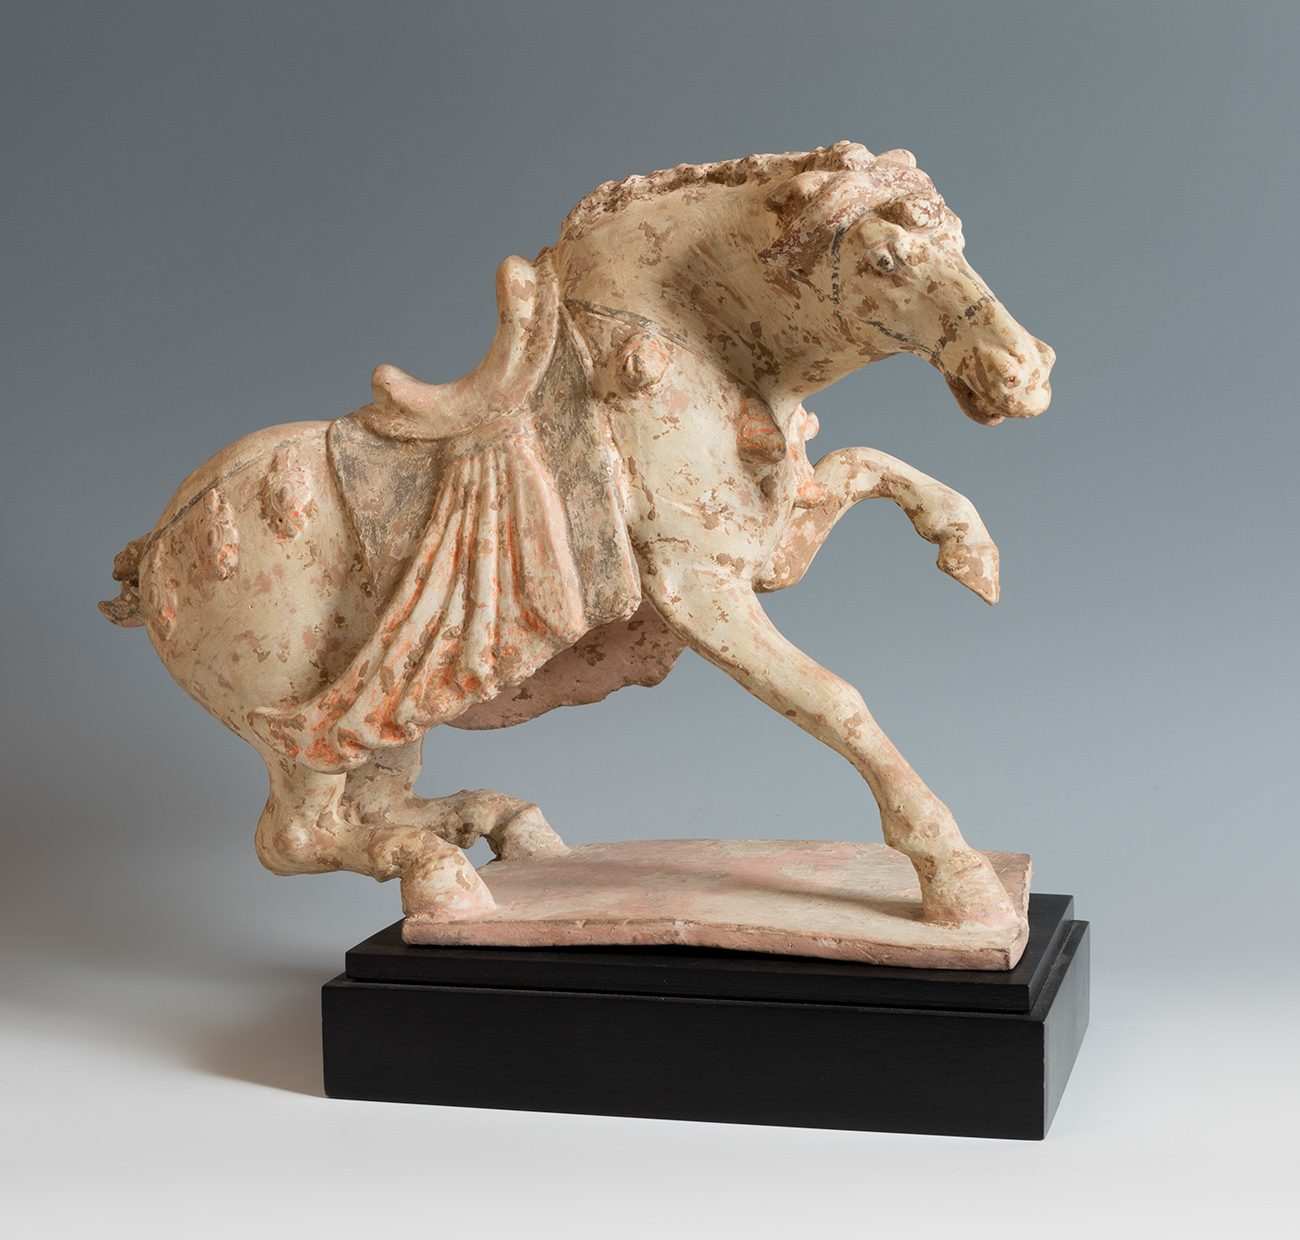 Horse. China. Tang Dynasty, AD 618-907.Terracotta and pigments.Provenance: private collection, A.